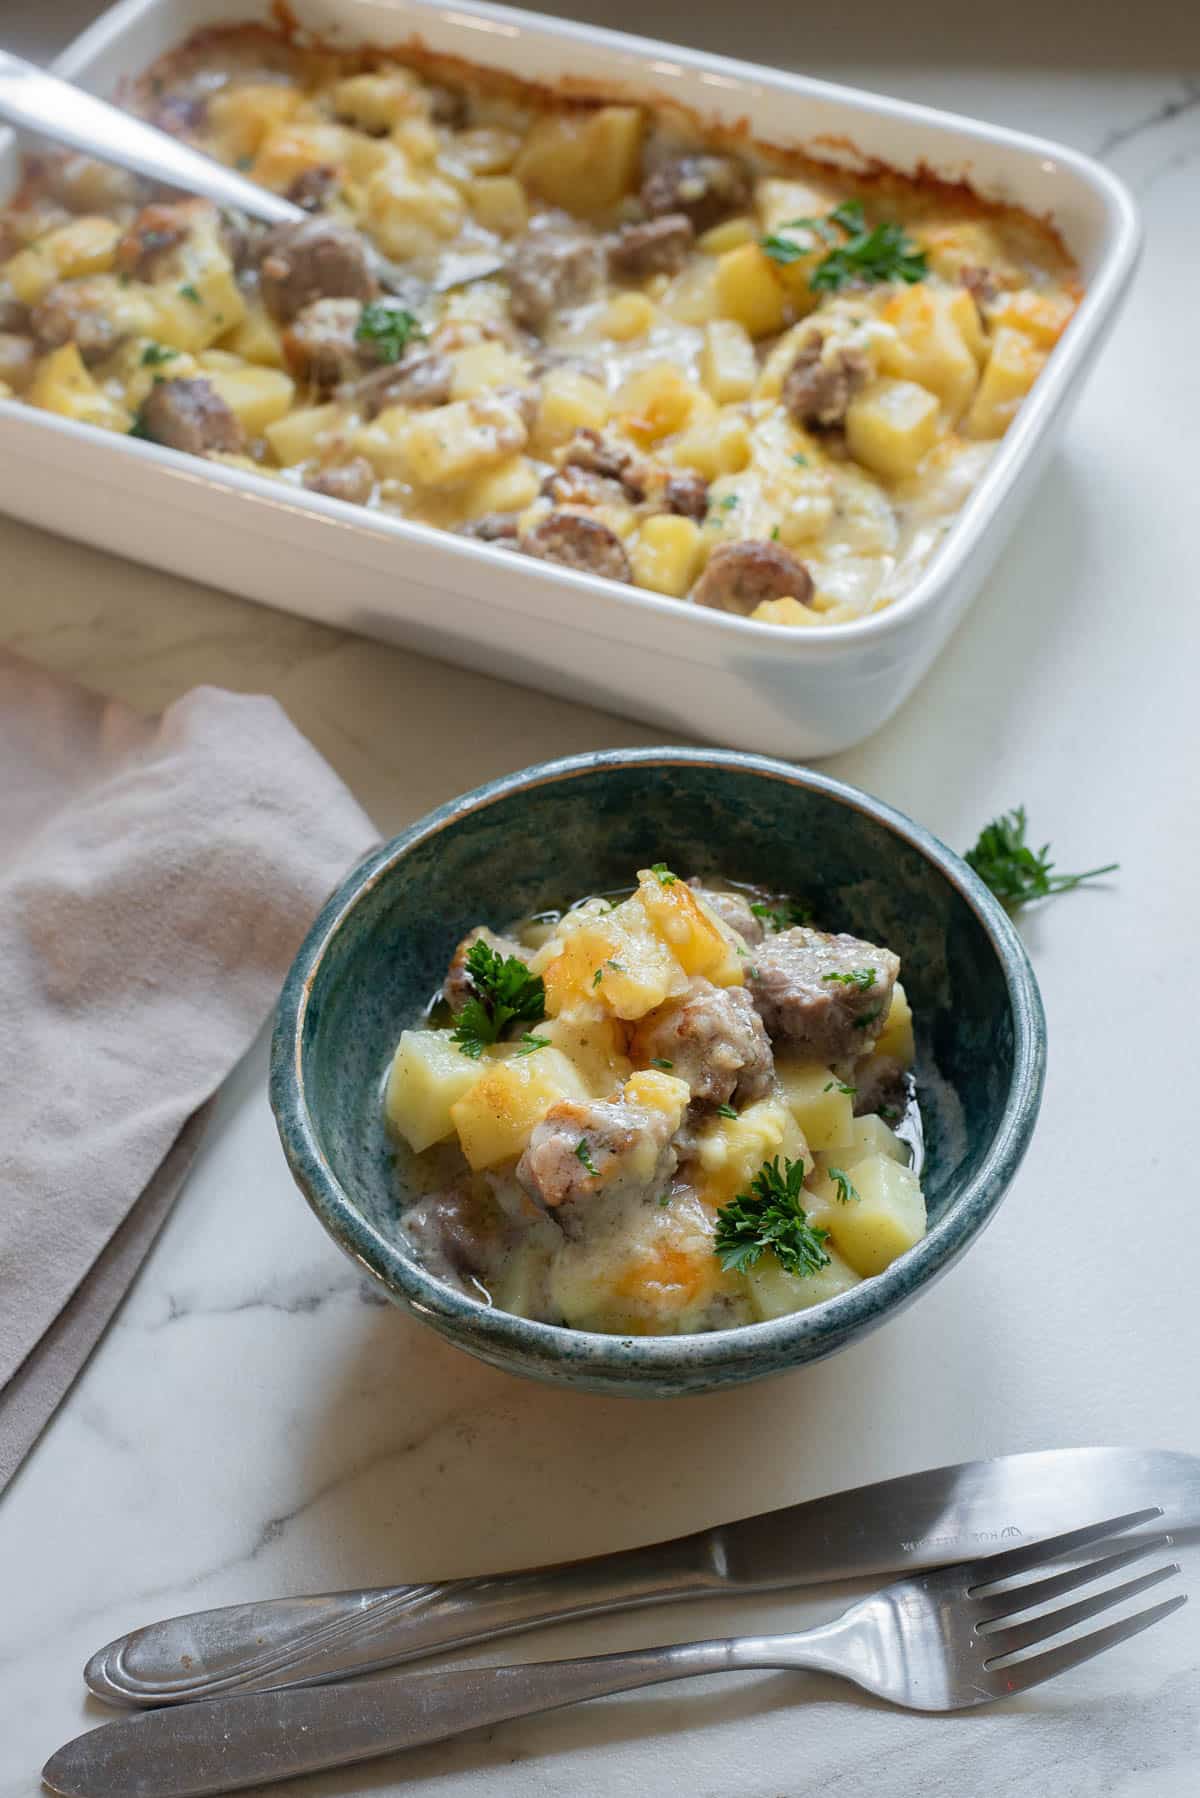 Potato and sausage casserole with cheese.